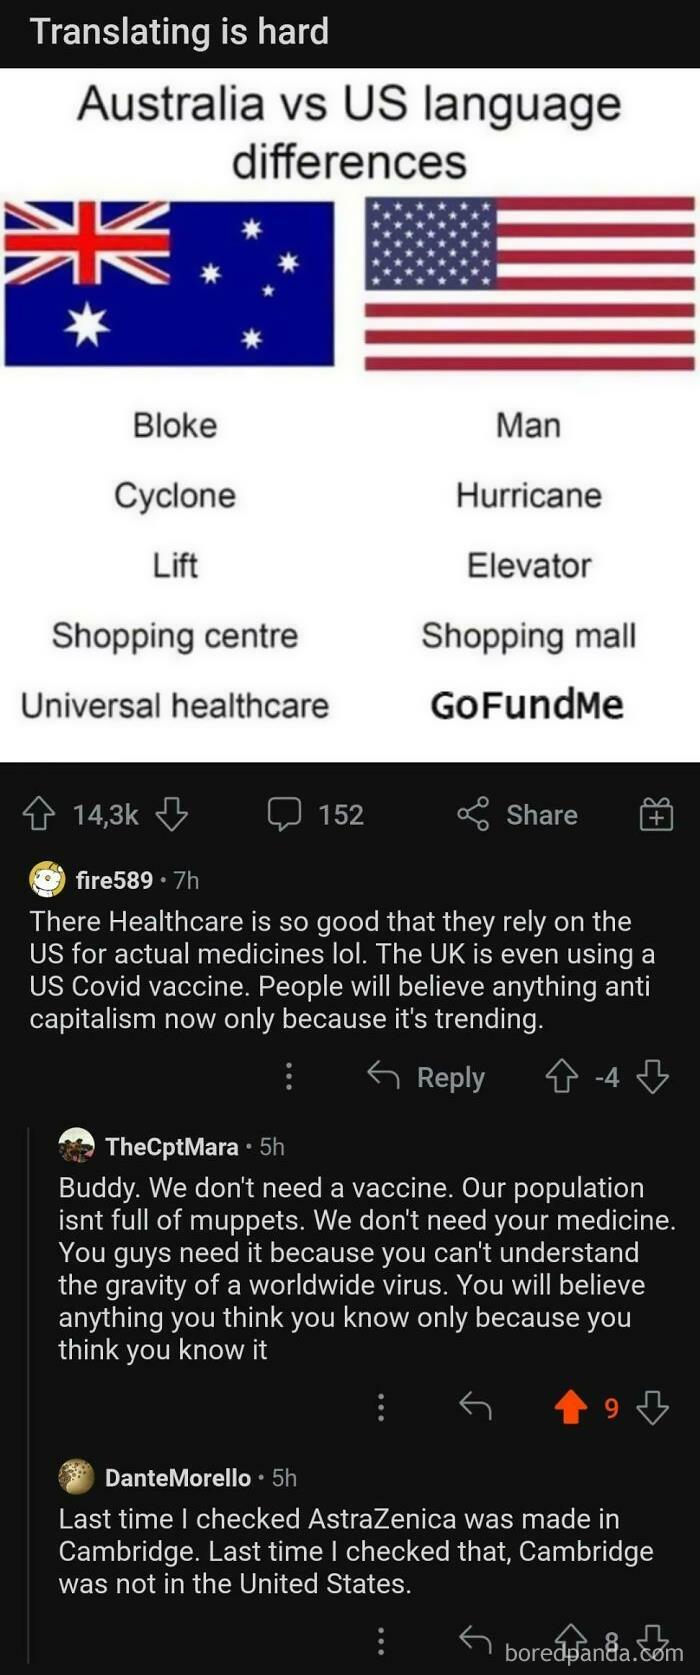 "There Healthcare Is So Good That They Rely On The Us For Actual Medicines Lol"